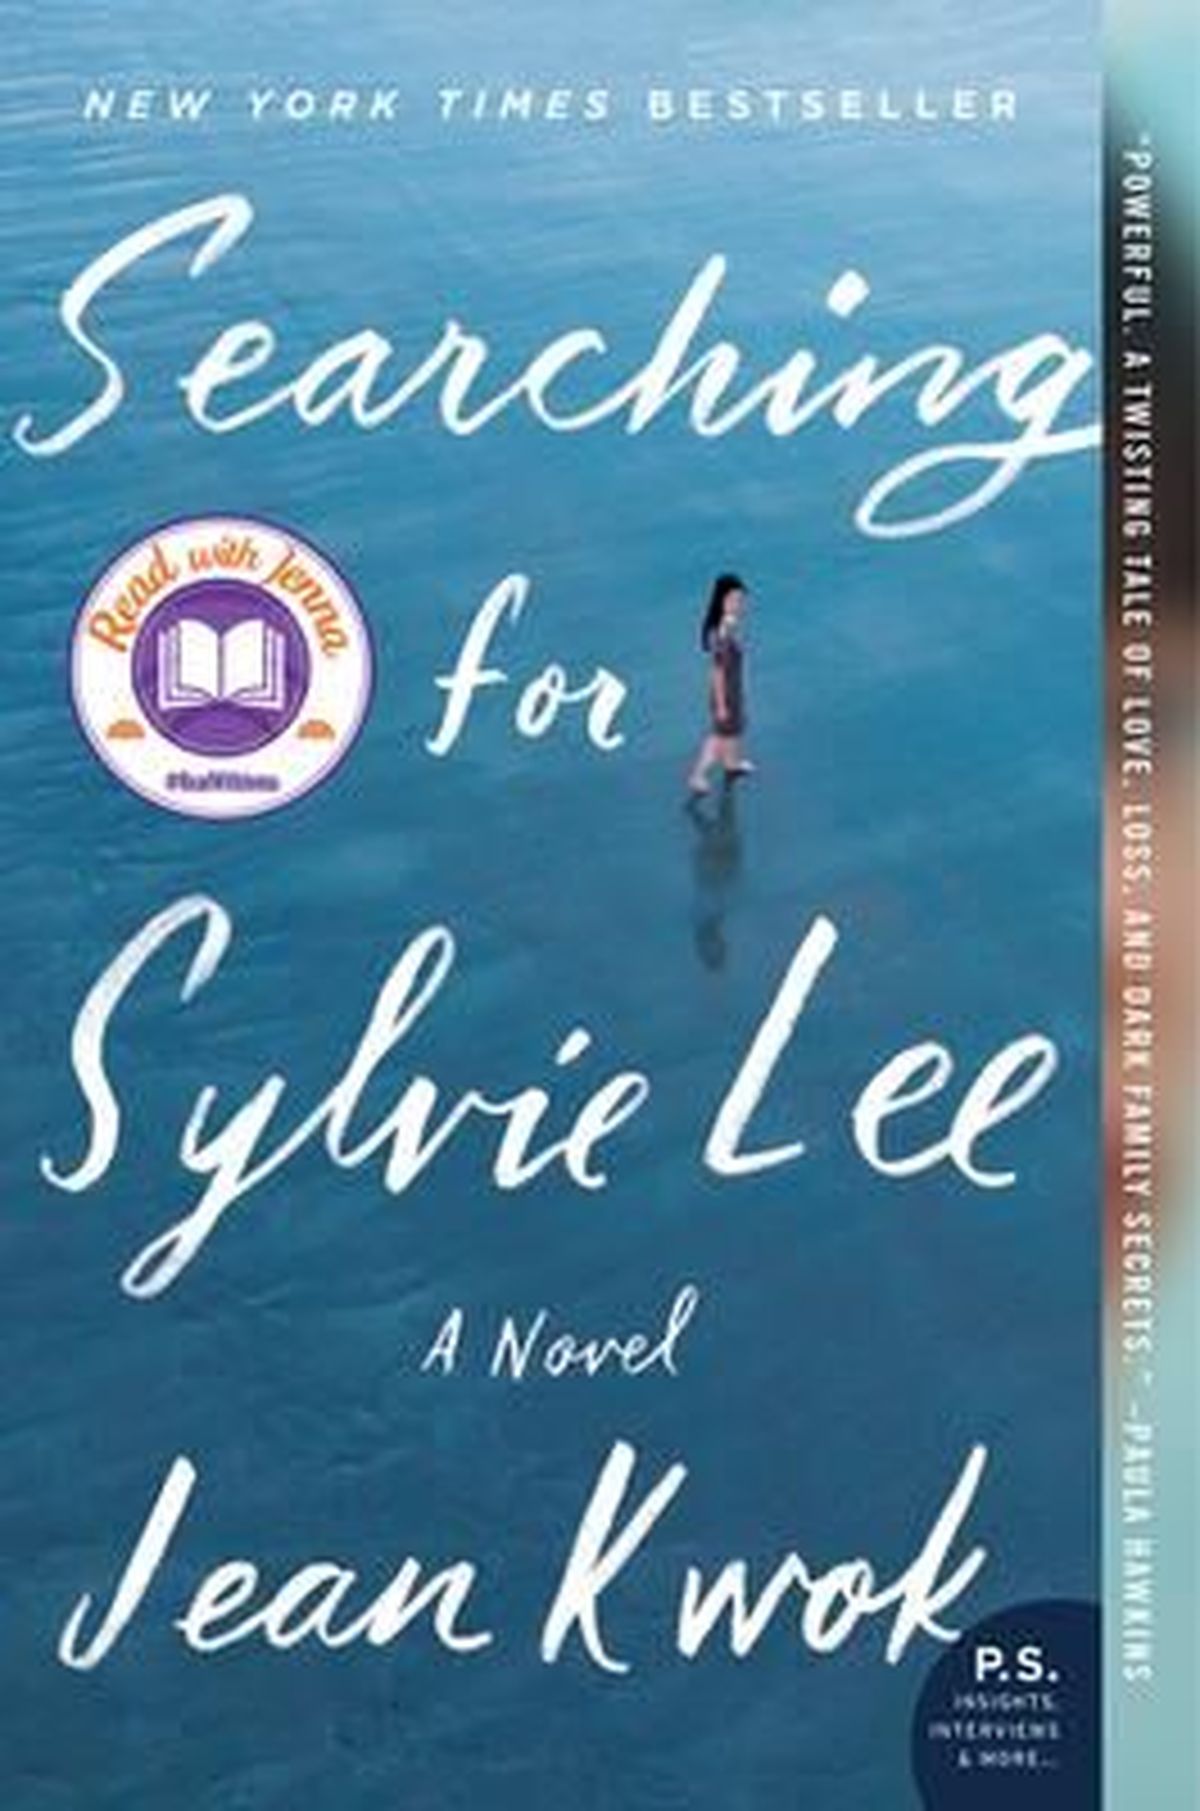 "Searching for Sylvie Lee" by Jean Kwok  (Courtesy)